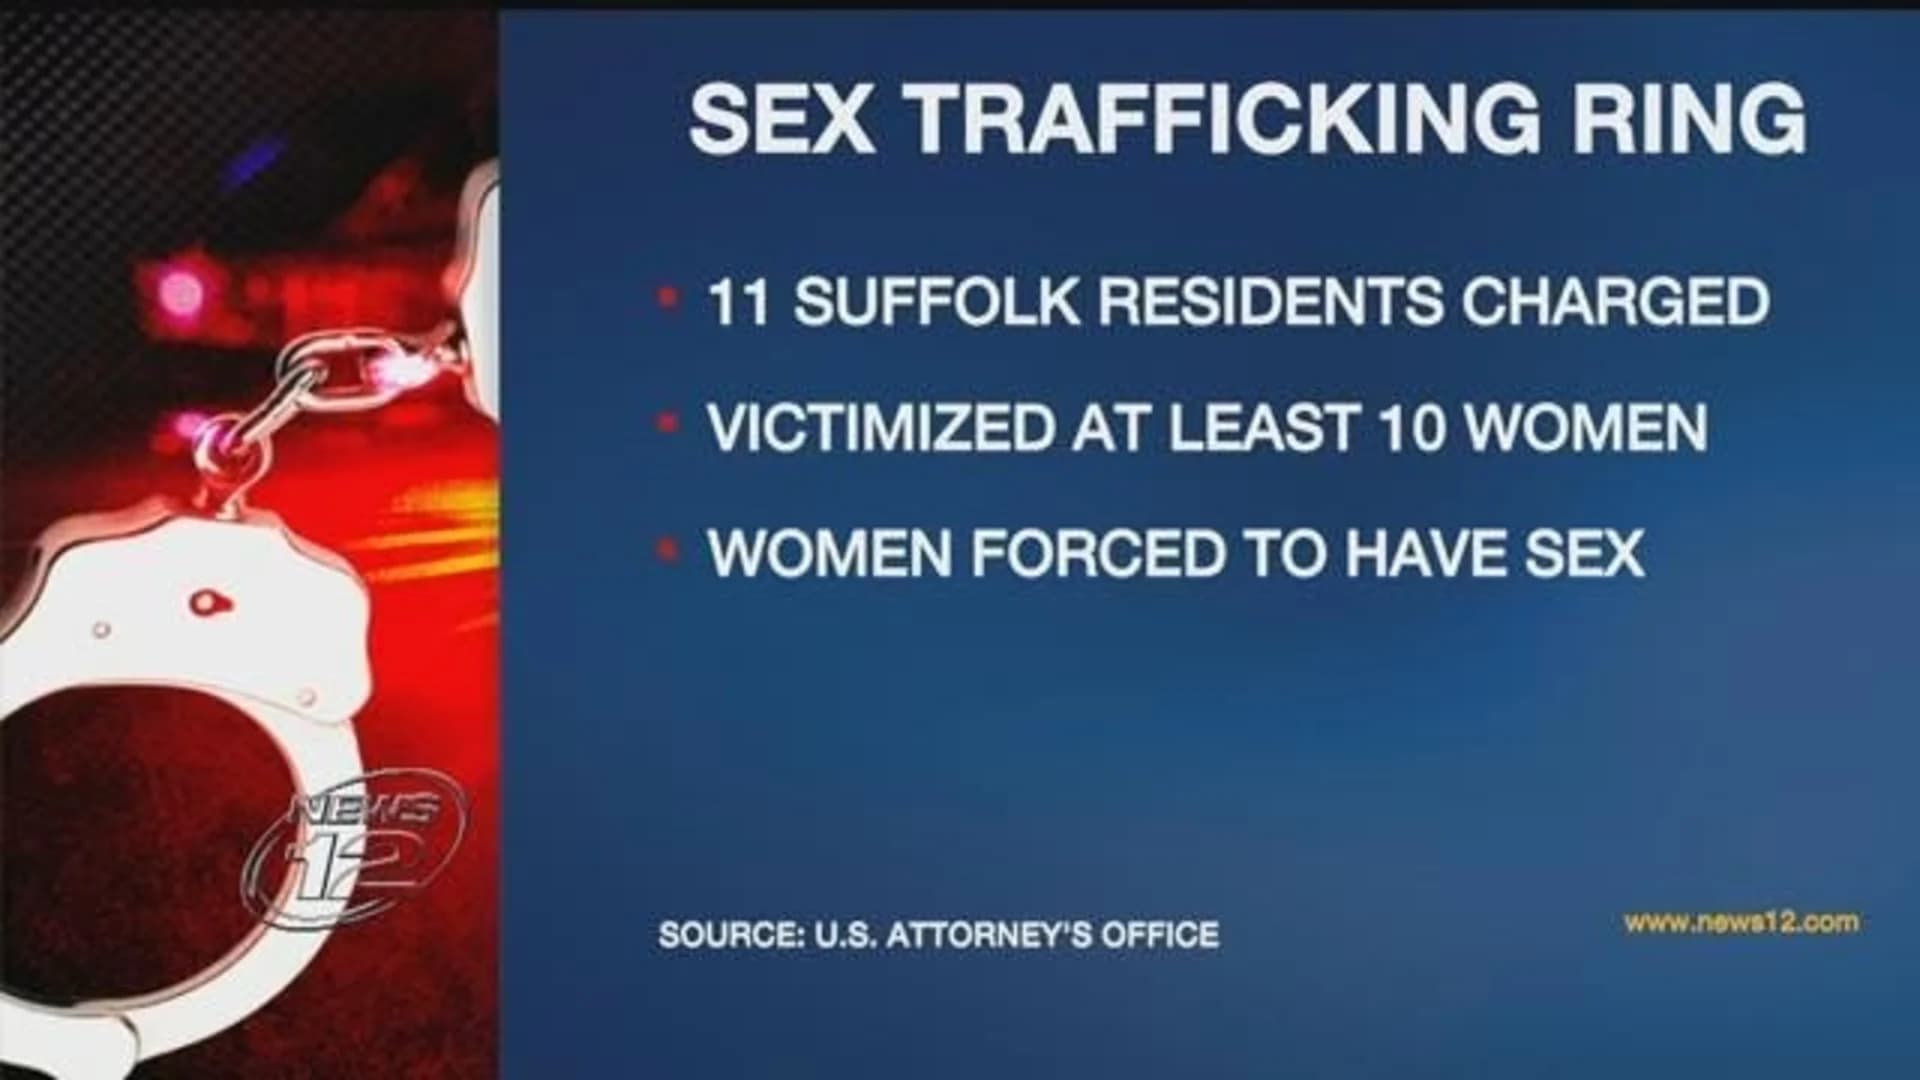 Police: 11 Suffolk residents charged in sex trafficking ring